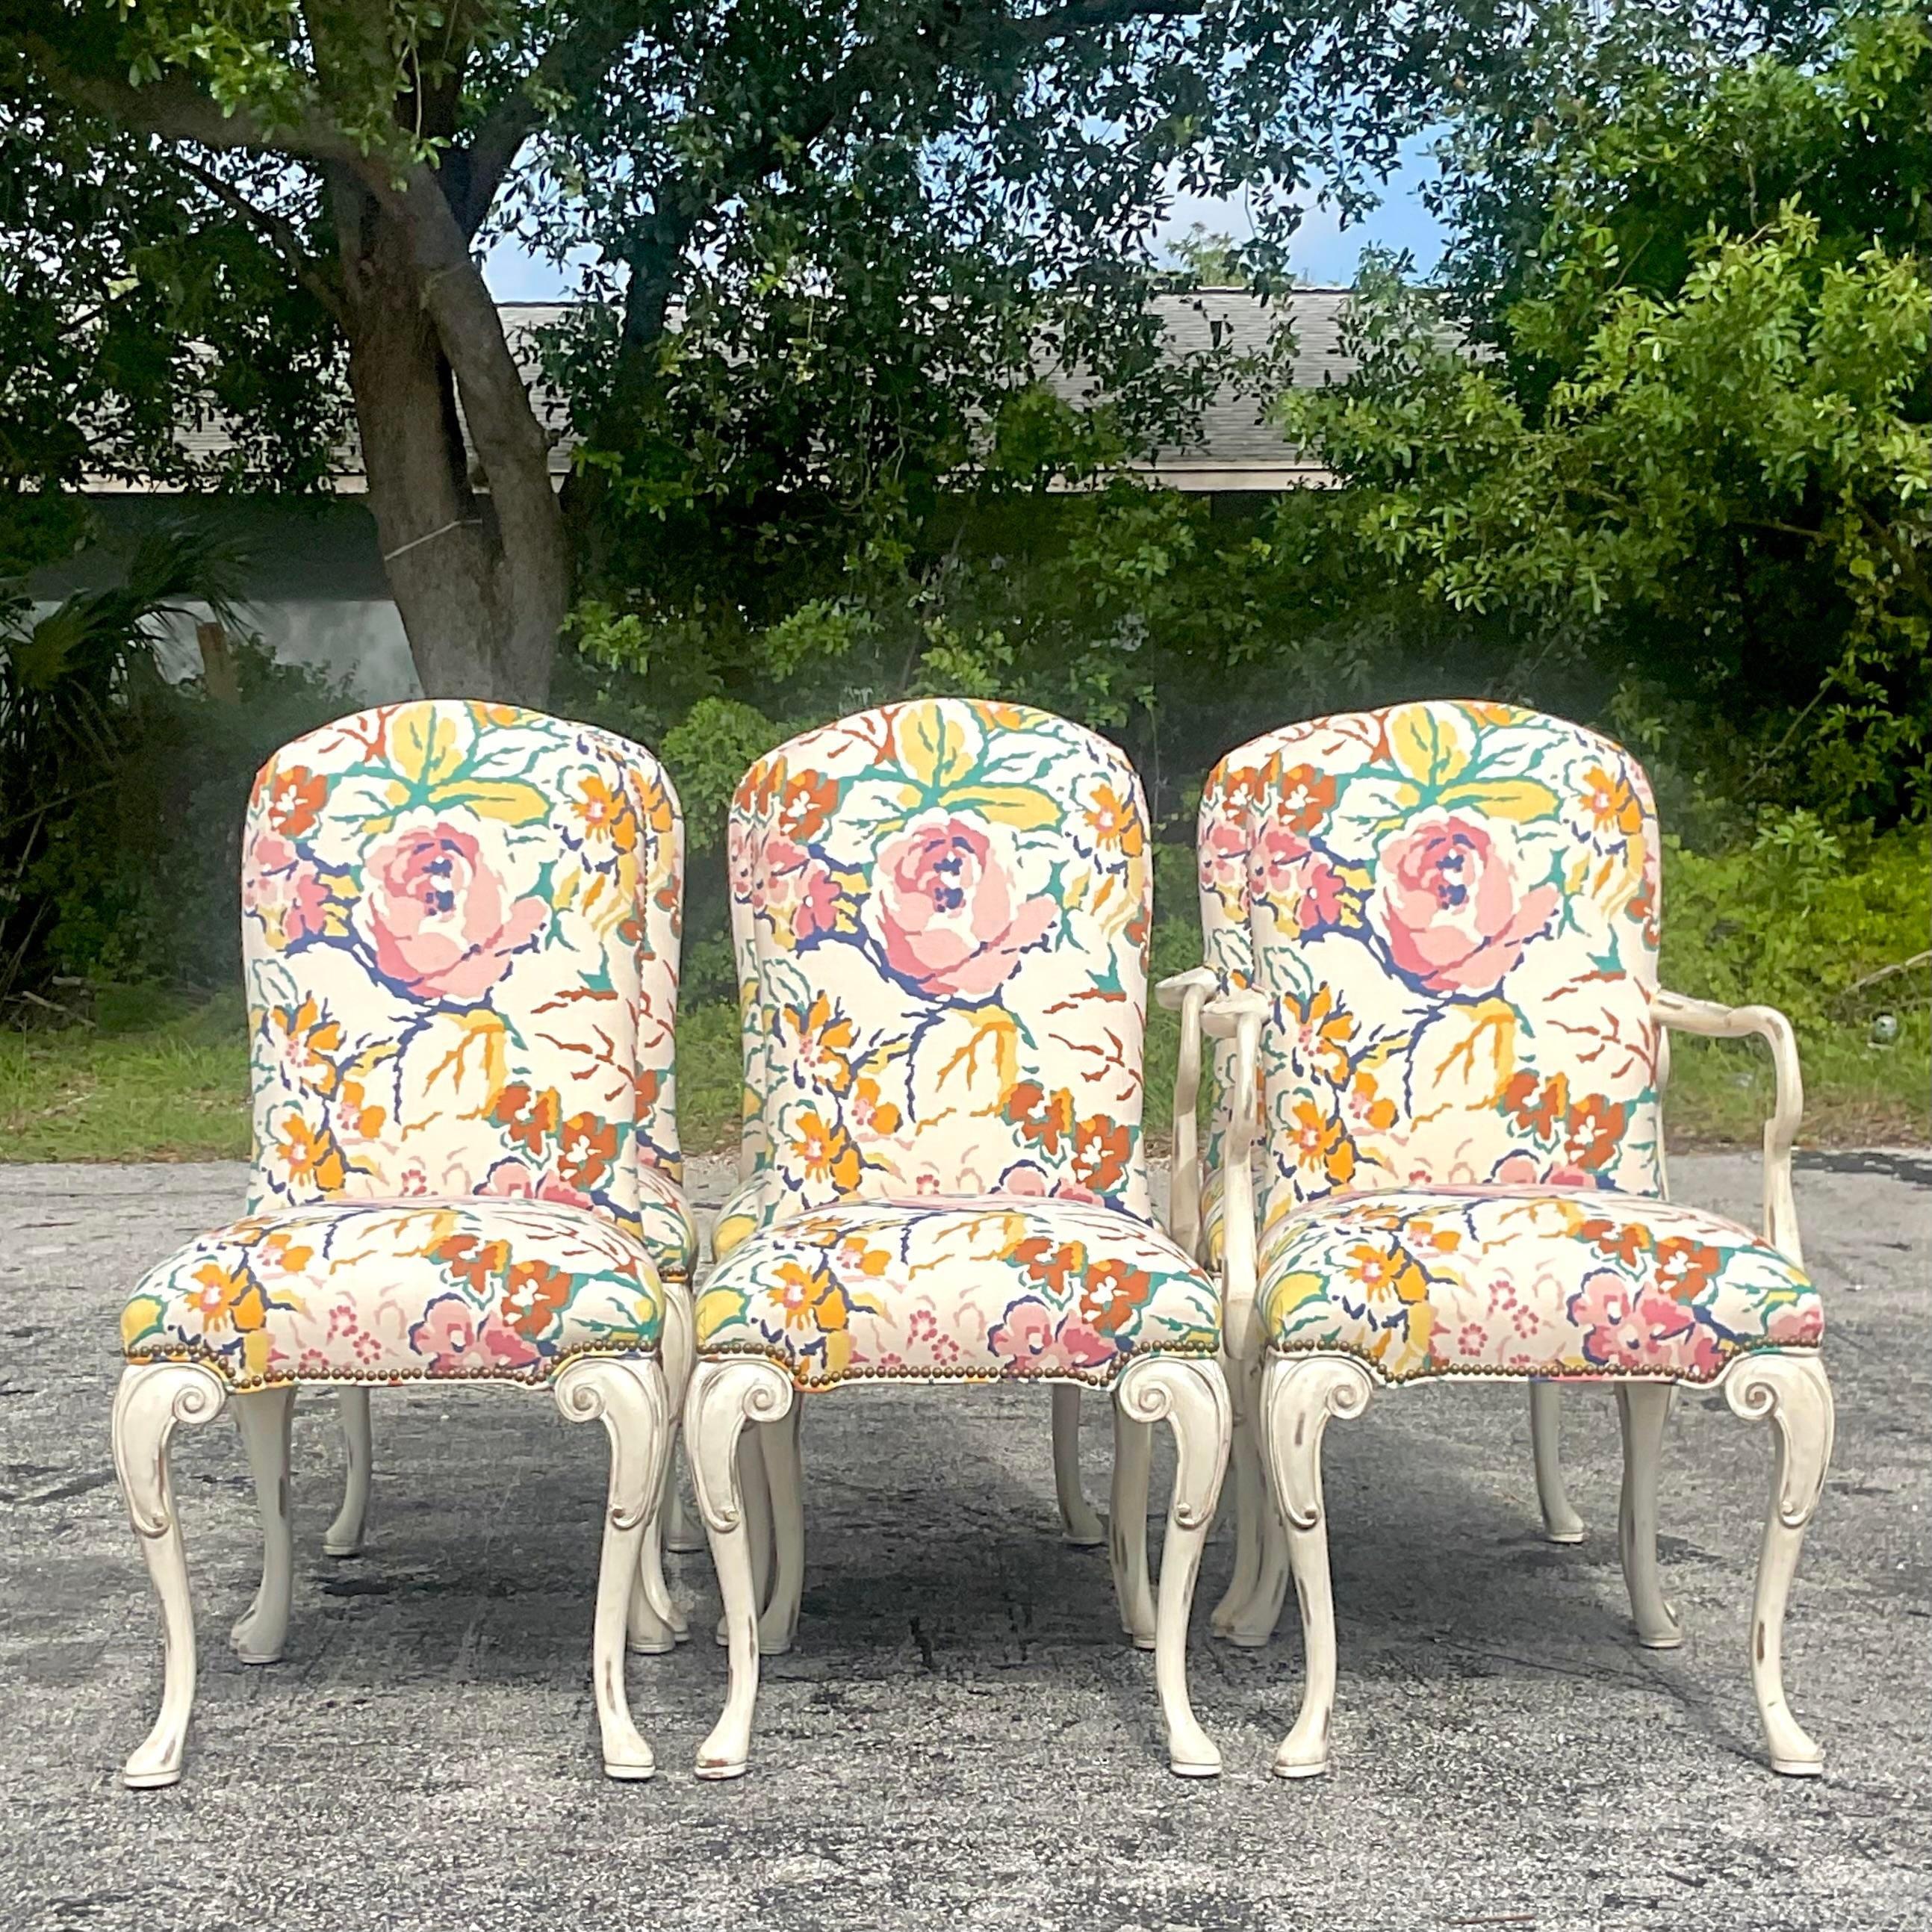 American Vintage Regency Councill Floral Dining Chairs - Set of 6